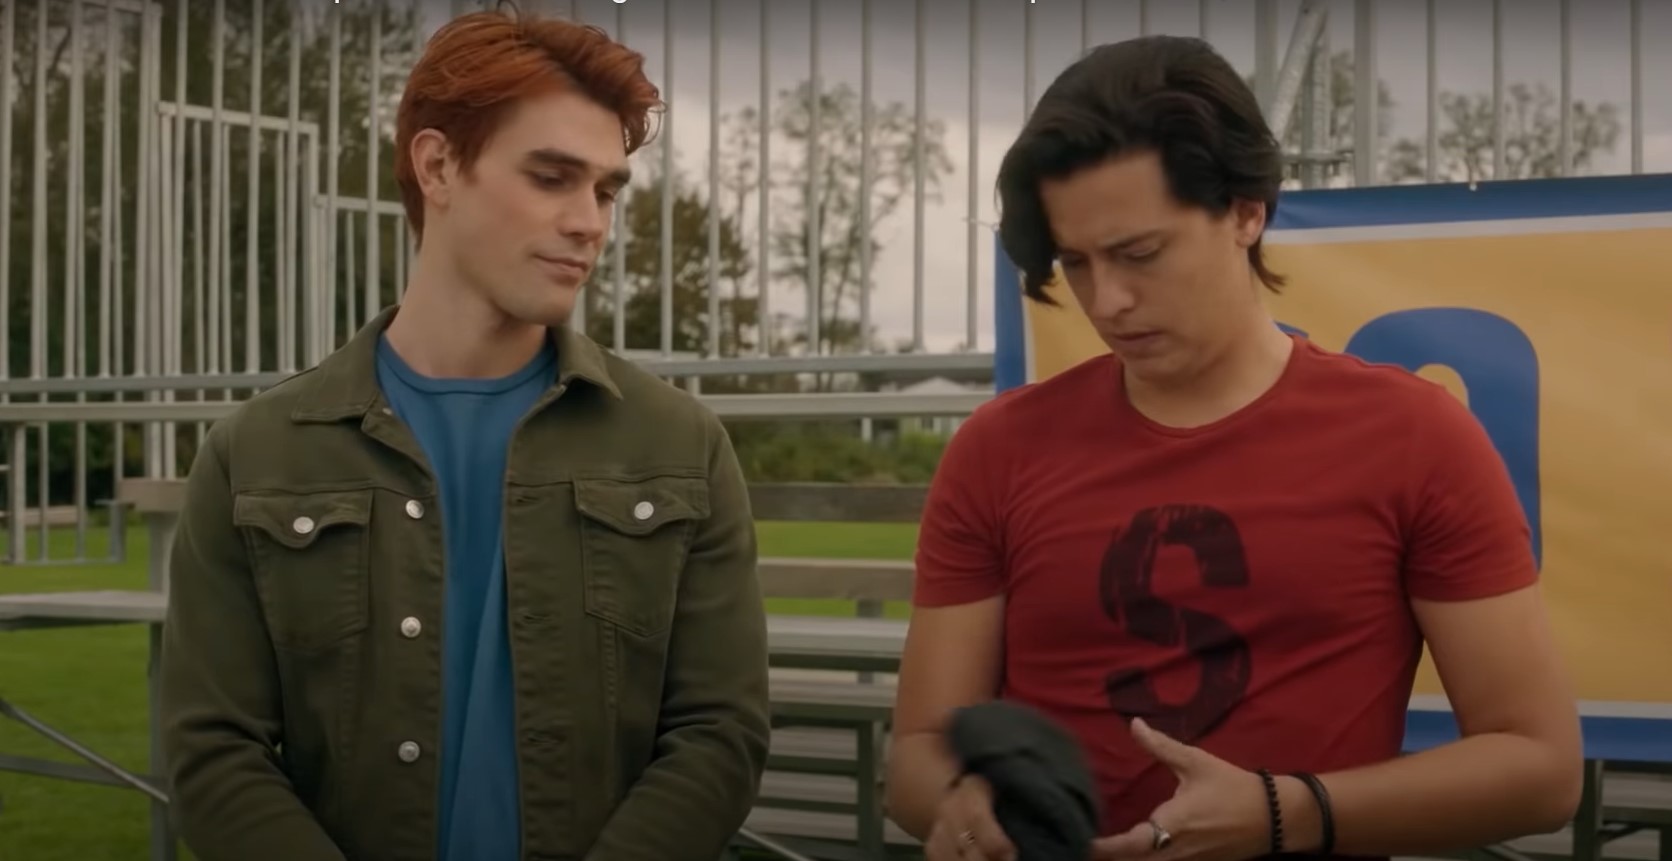 KJ Apa and Cole Sprouse as Archie and Jughead on 'Riverdale'